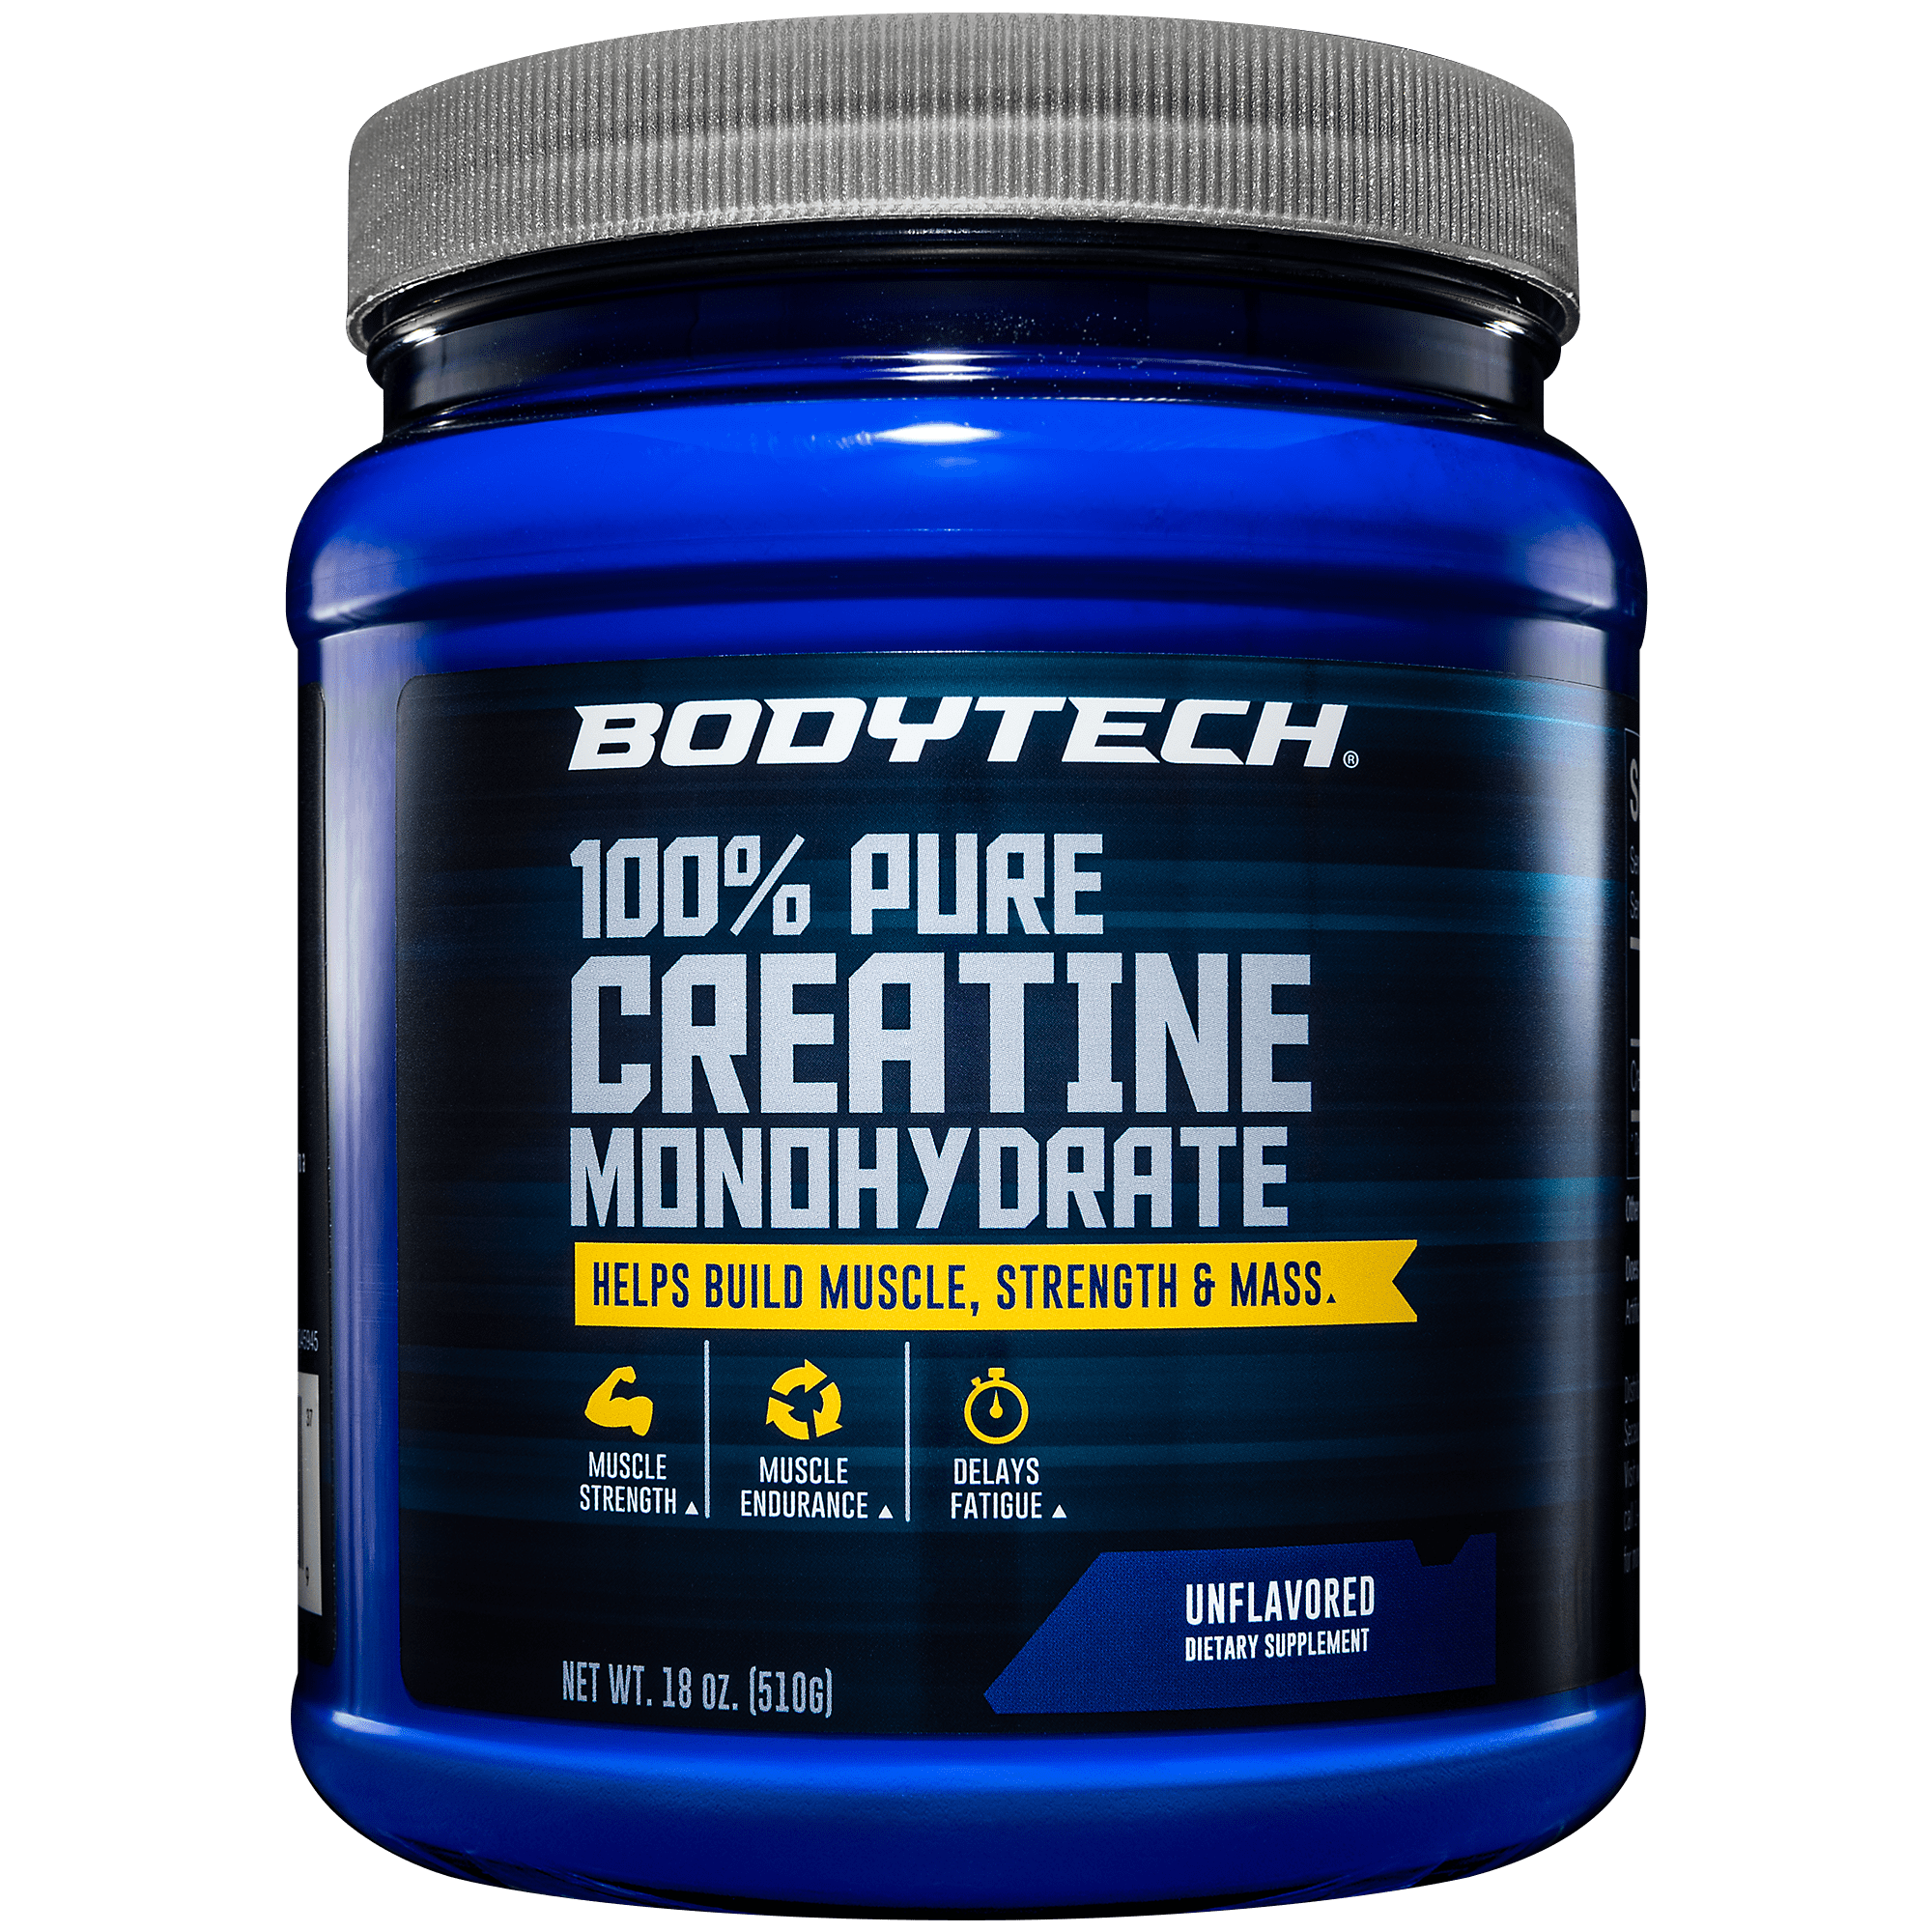 BodyTech 100 Pure Creatine Monohydrate 5 GM/serving Supports Muscle Strength (18 Ounce Powder) -